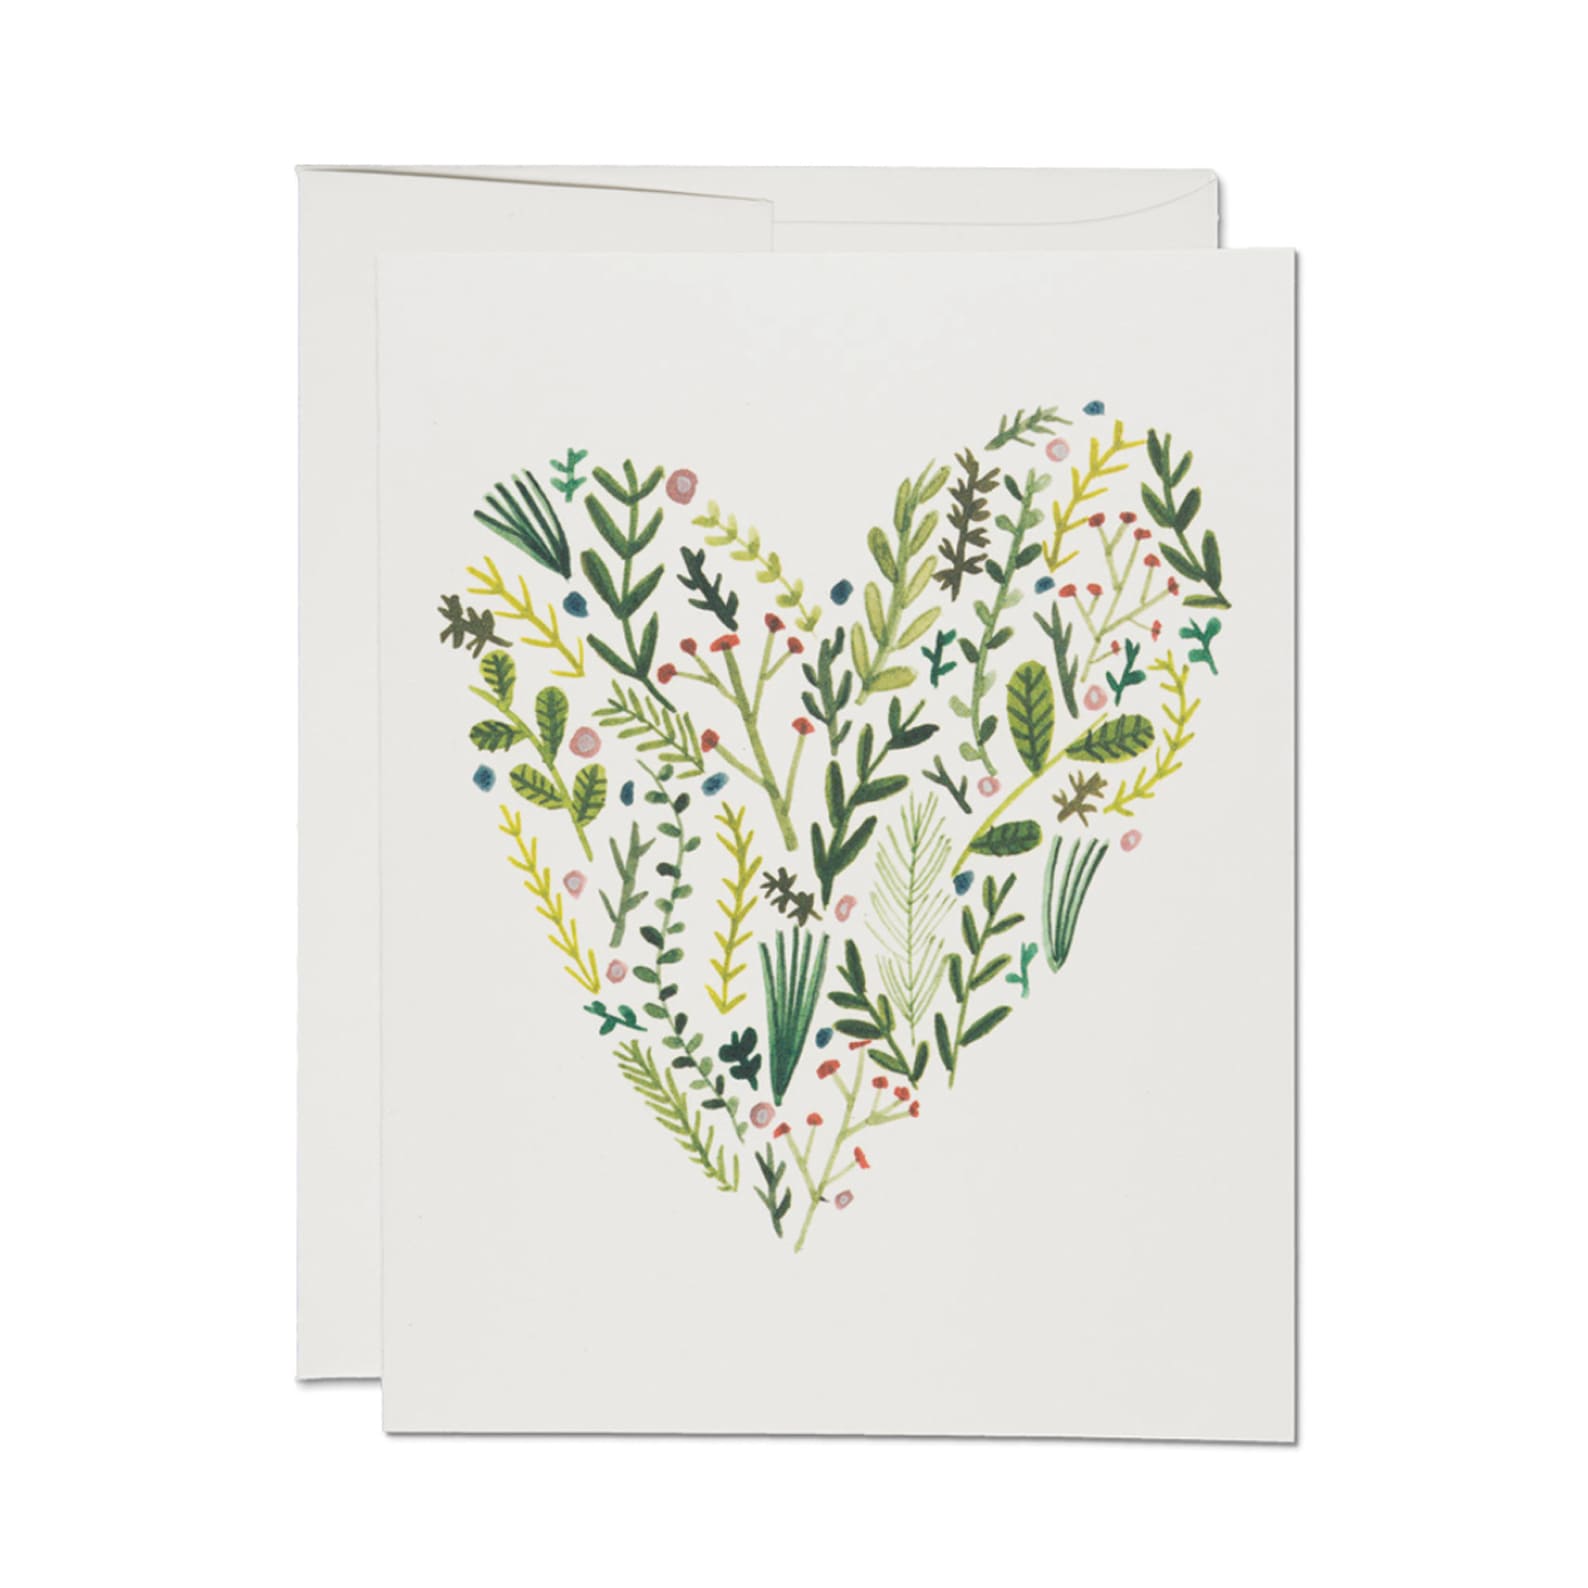 Love & Friendship Card | Floral Heart | Red Cap Cards